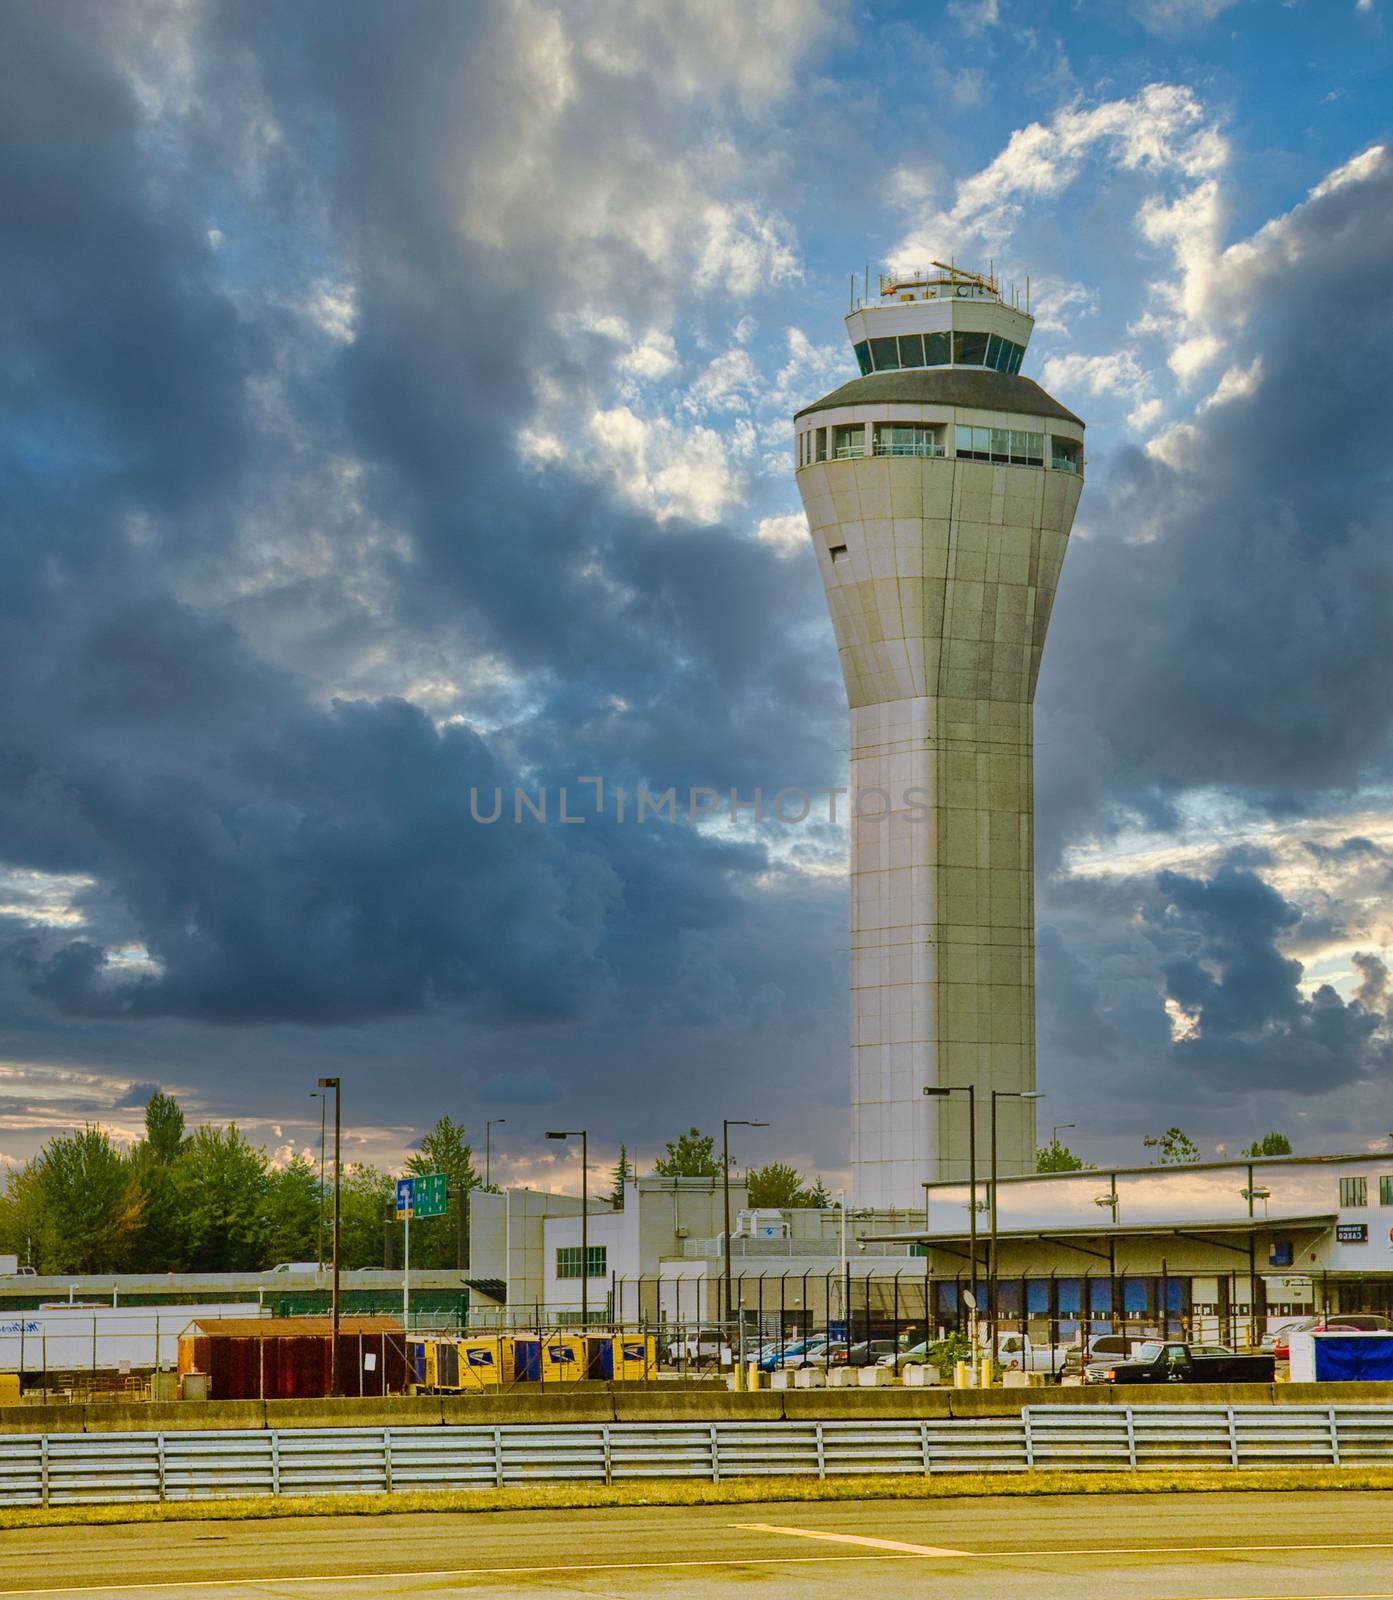 The control tower at a busy commercial airport